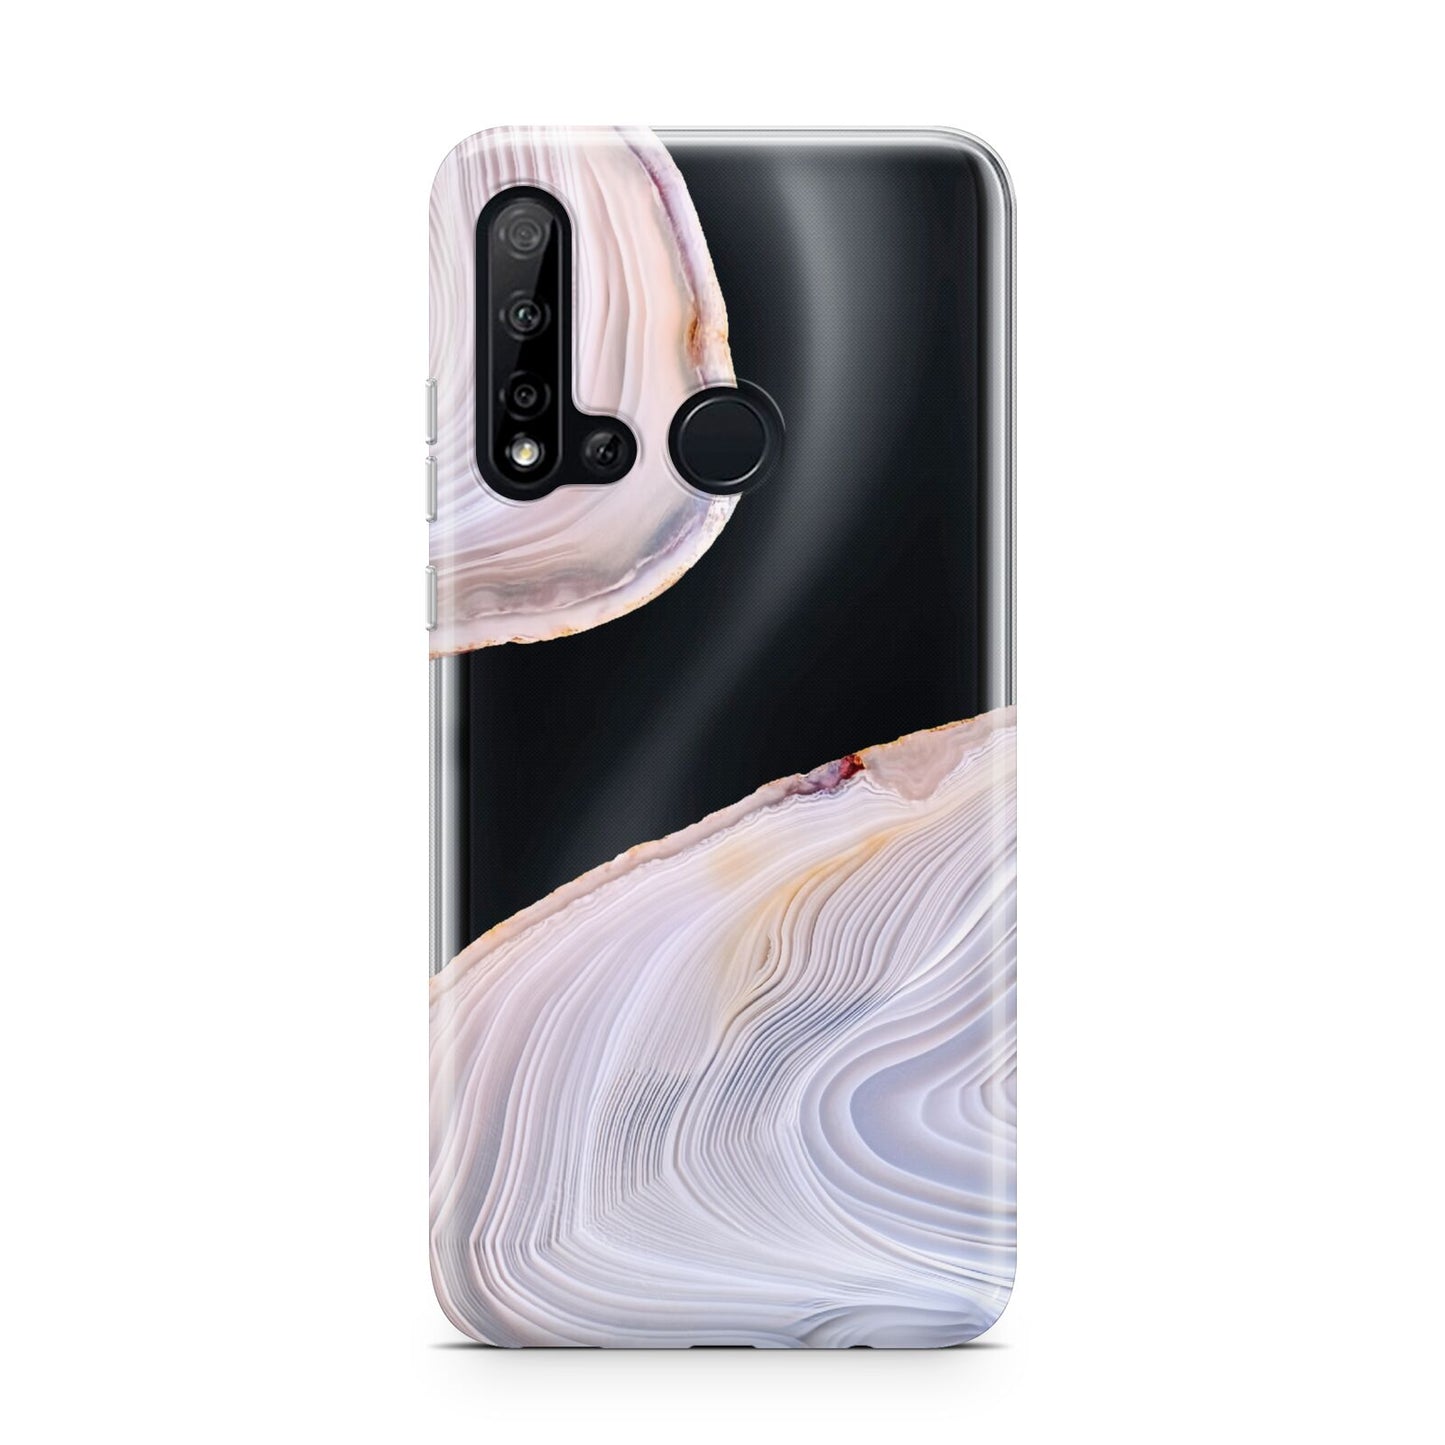 Agate Pale Pink and Blue Huawei P20 Lite 5G Phone Case